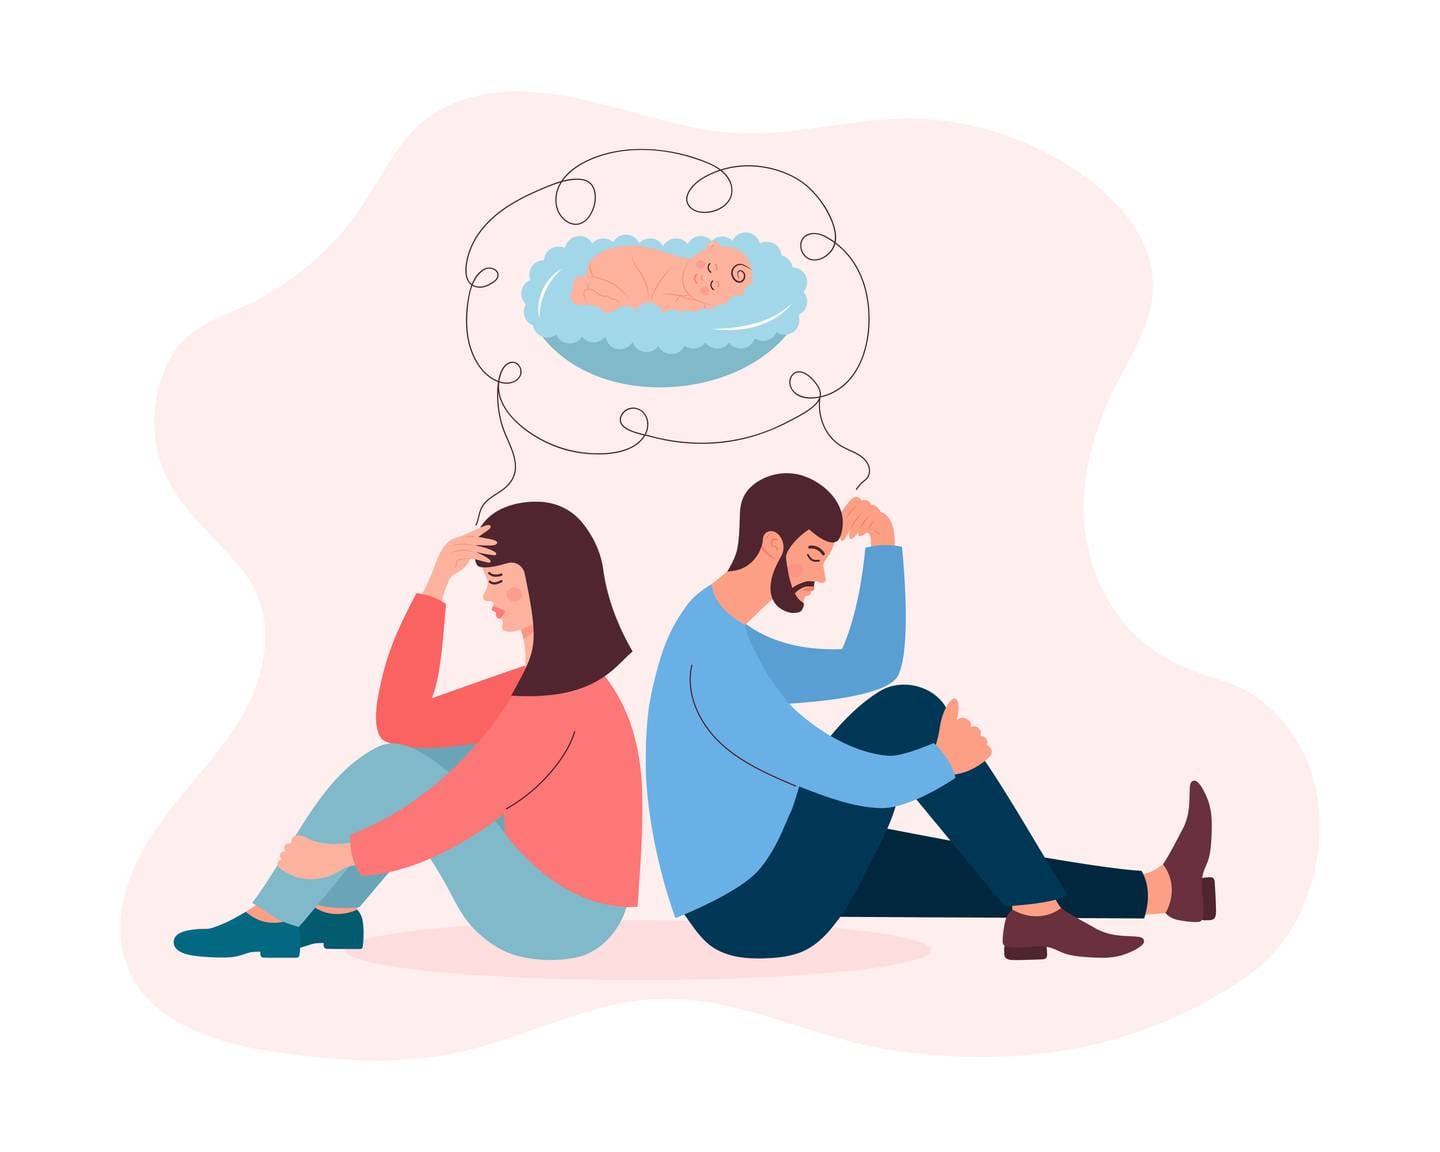 Infertile couple dreams about baby. Man and woman sitting back to back and suffer from reproductive problems. Fertility problem, pregnancy problems, IVF, infertility, gynecological disease, family concept.